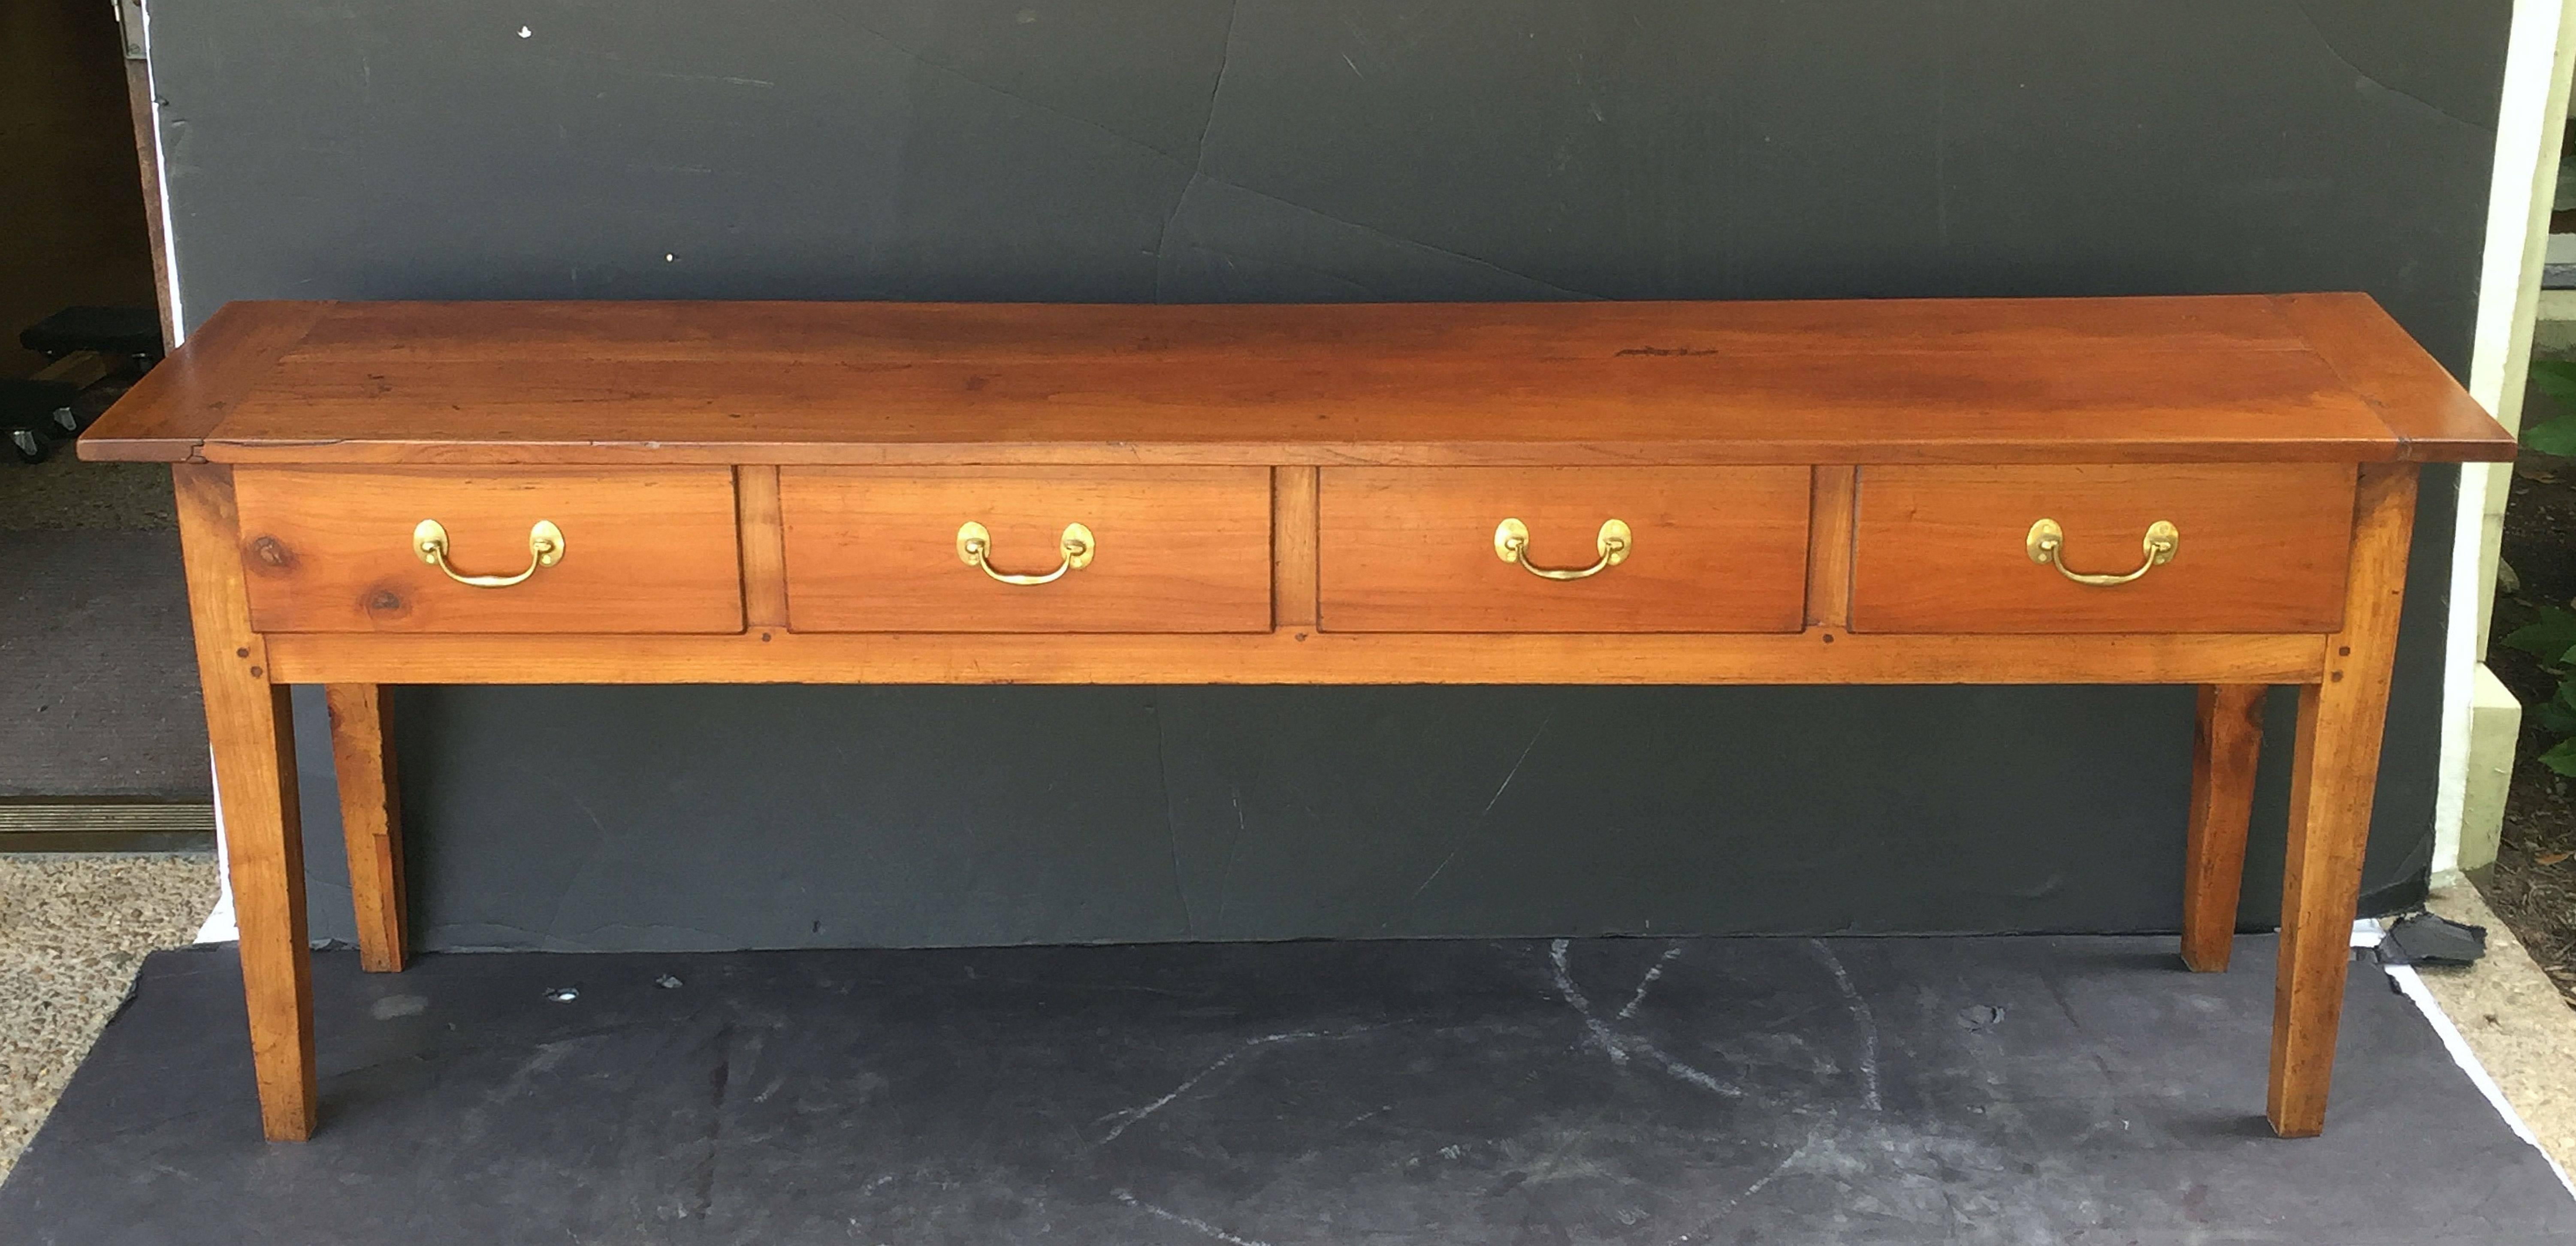 A handsome French console sideboard (or serving table) of cherry wood featuring a rectangular plank top over a large frieze with four drawers, each with brass hardware pulls, paneled back and sides, and resting on tapering square legs.